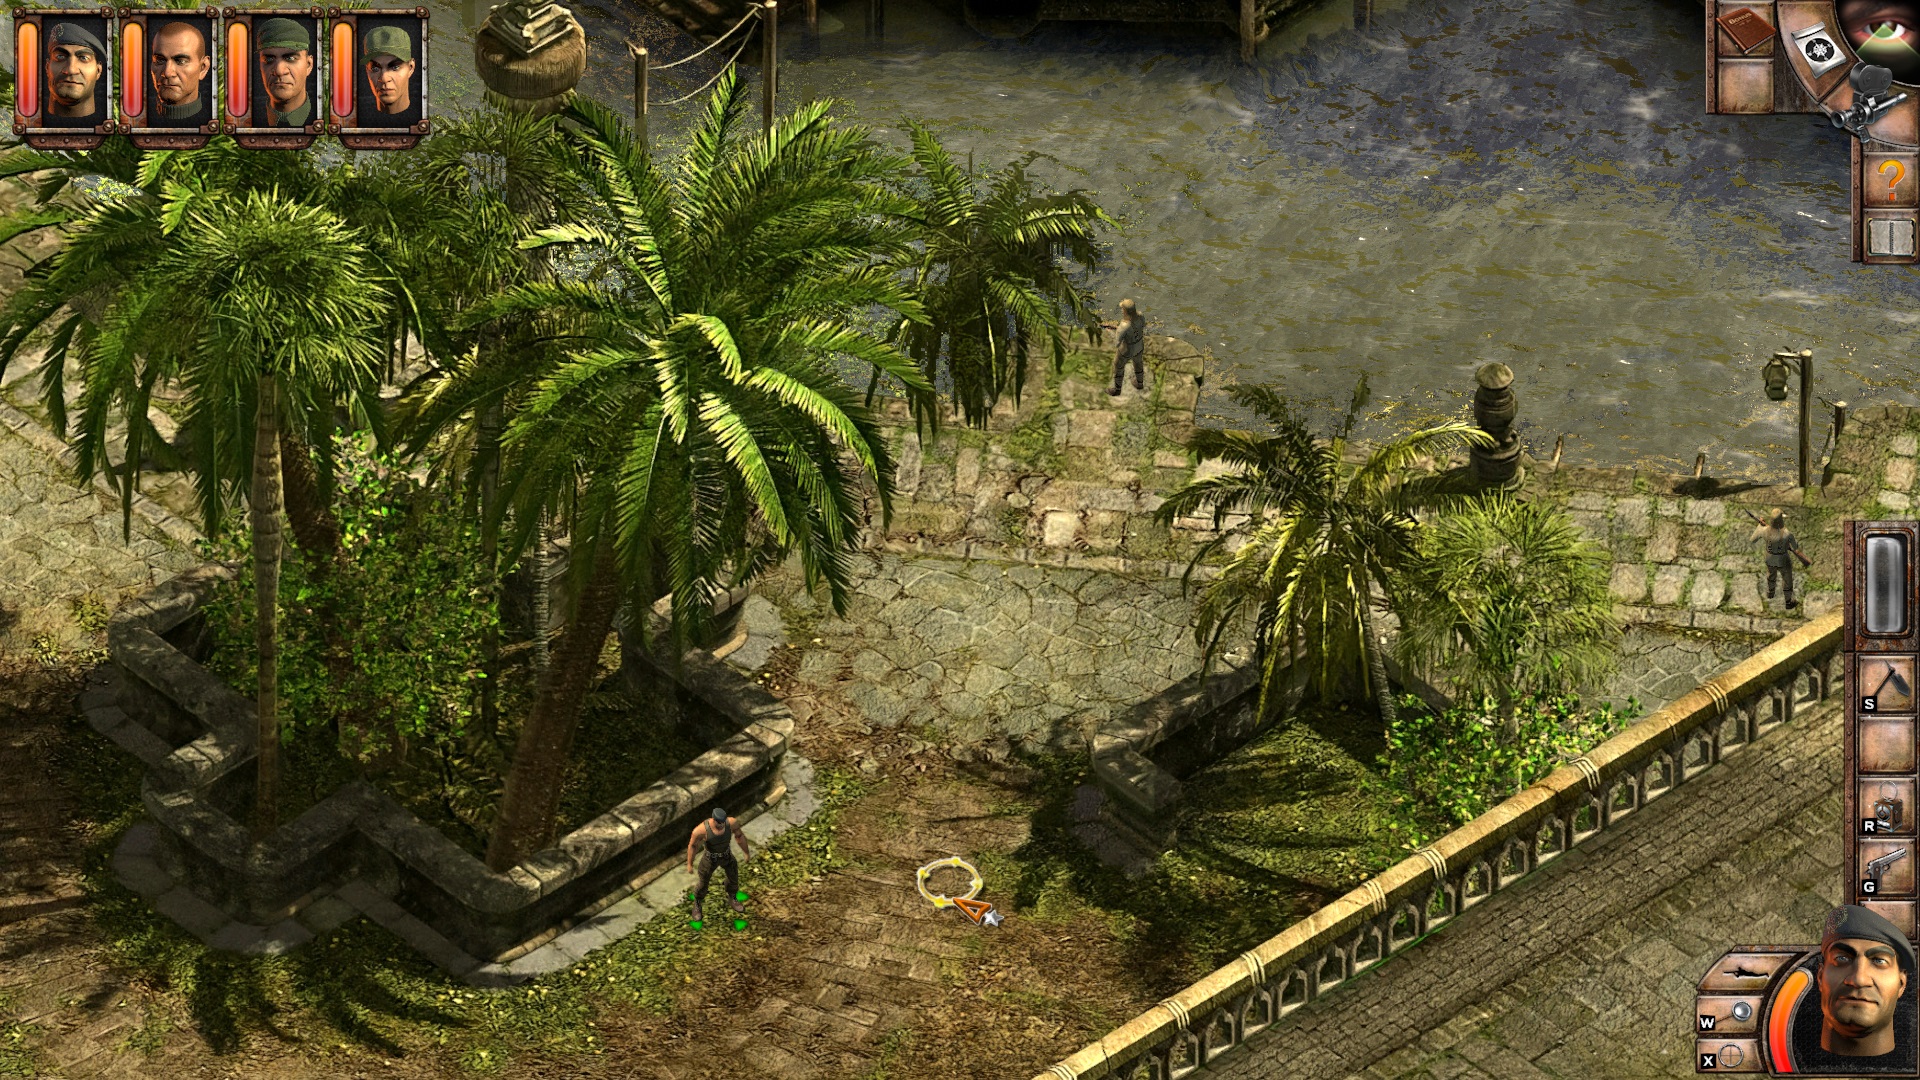 Commandos 2 & 3 – HD Remaster Double Pack